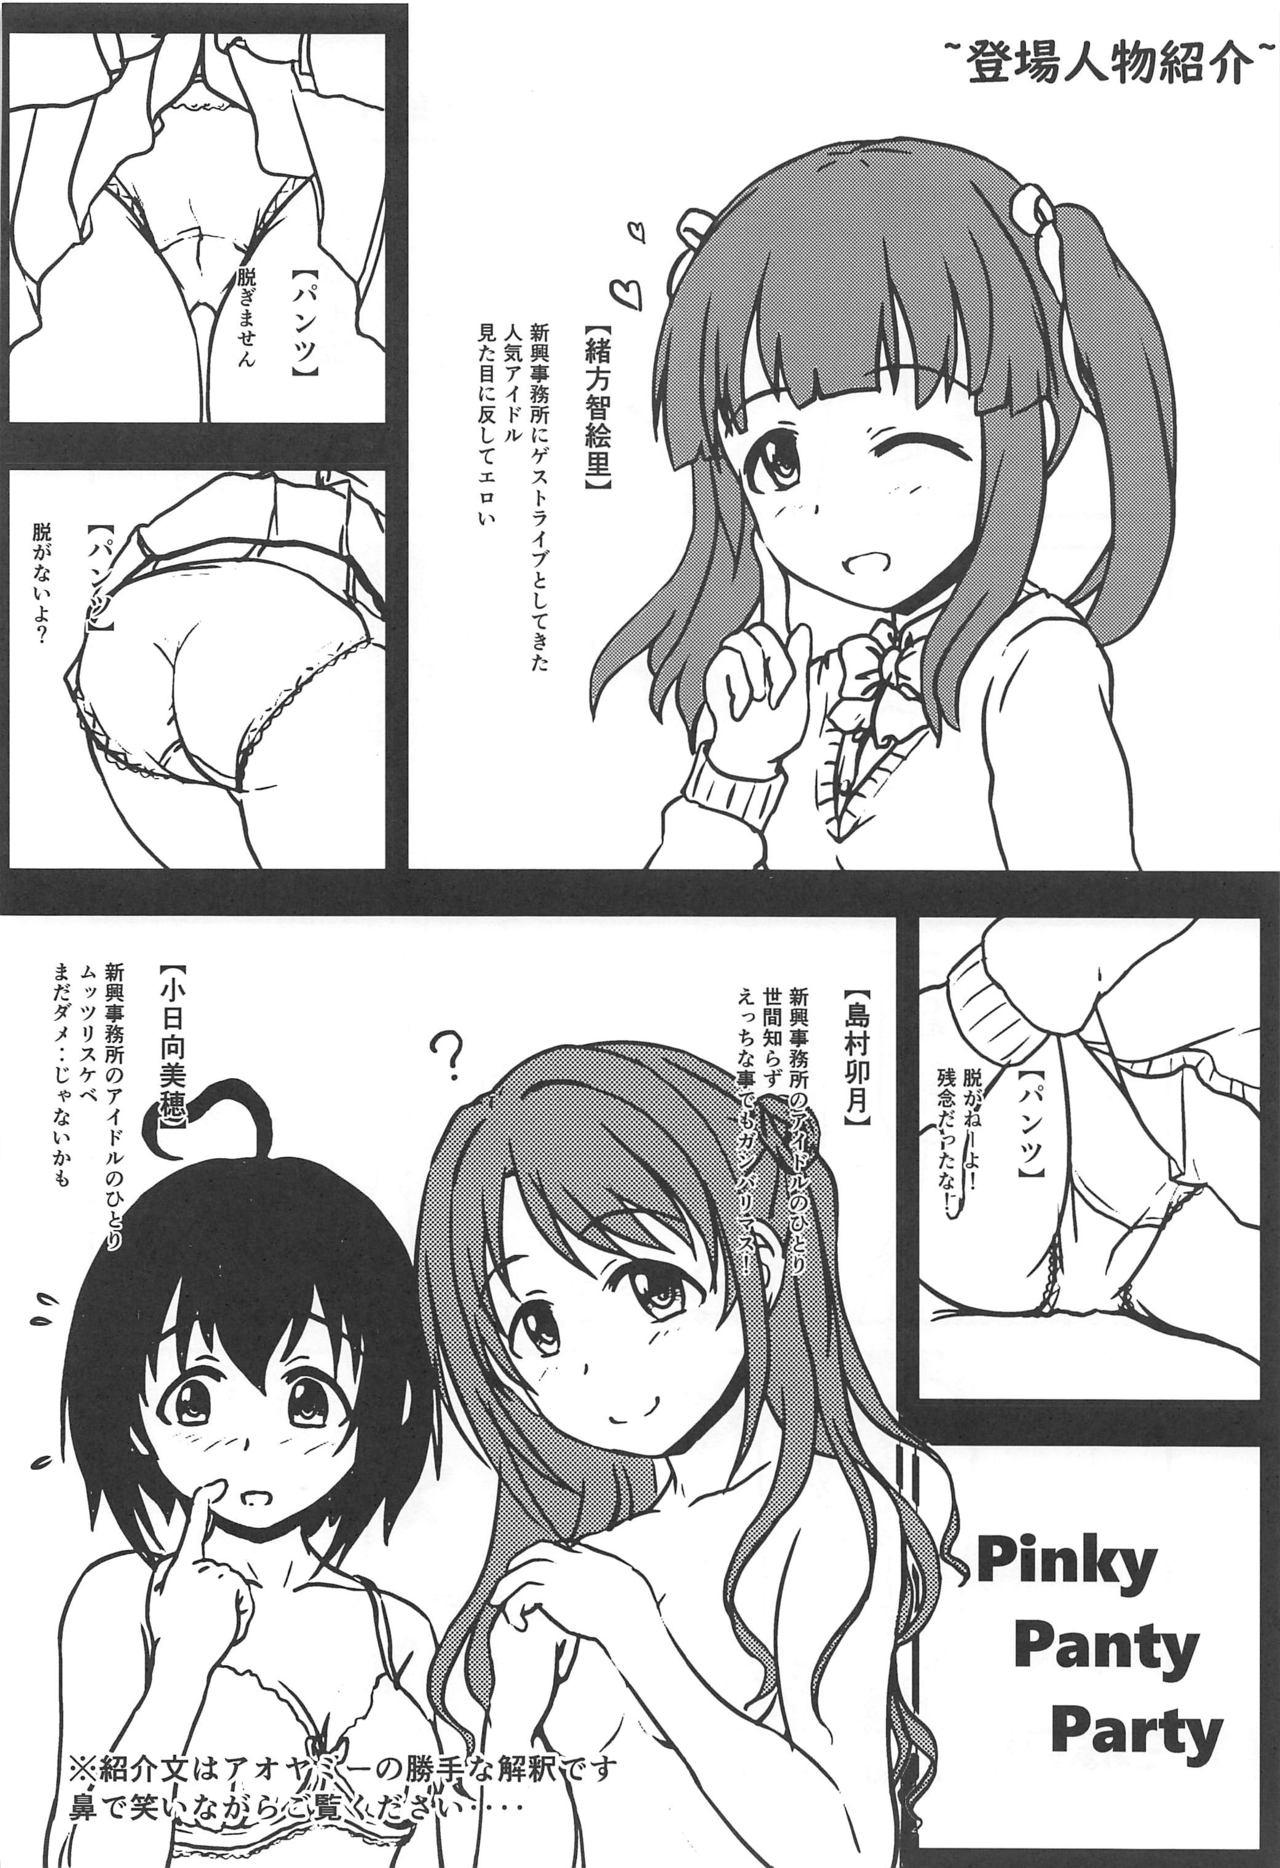 Hetero Pinky Panty Party - The idolmaster Amatur Porn - Page 3